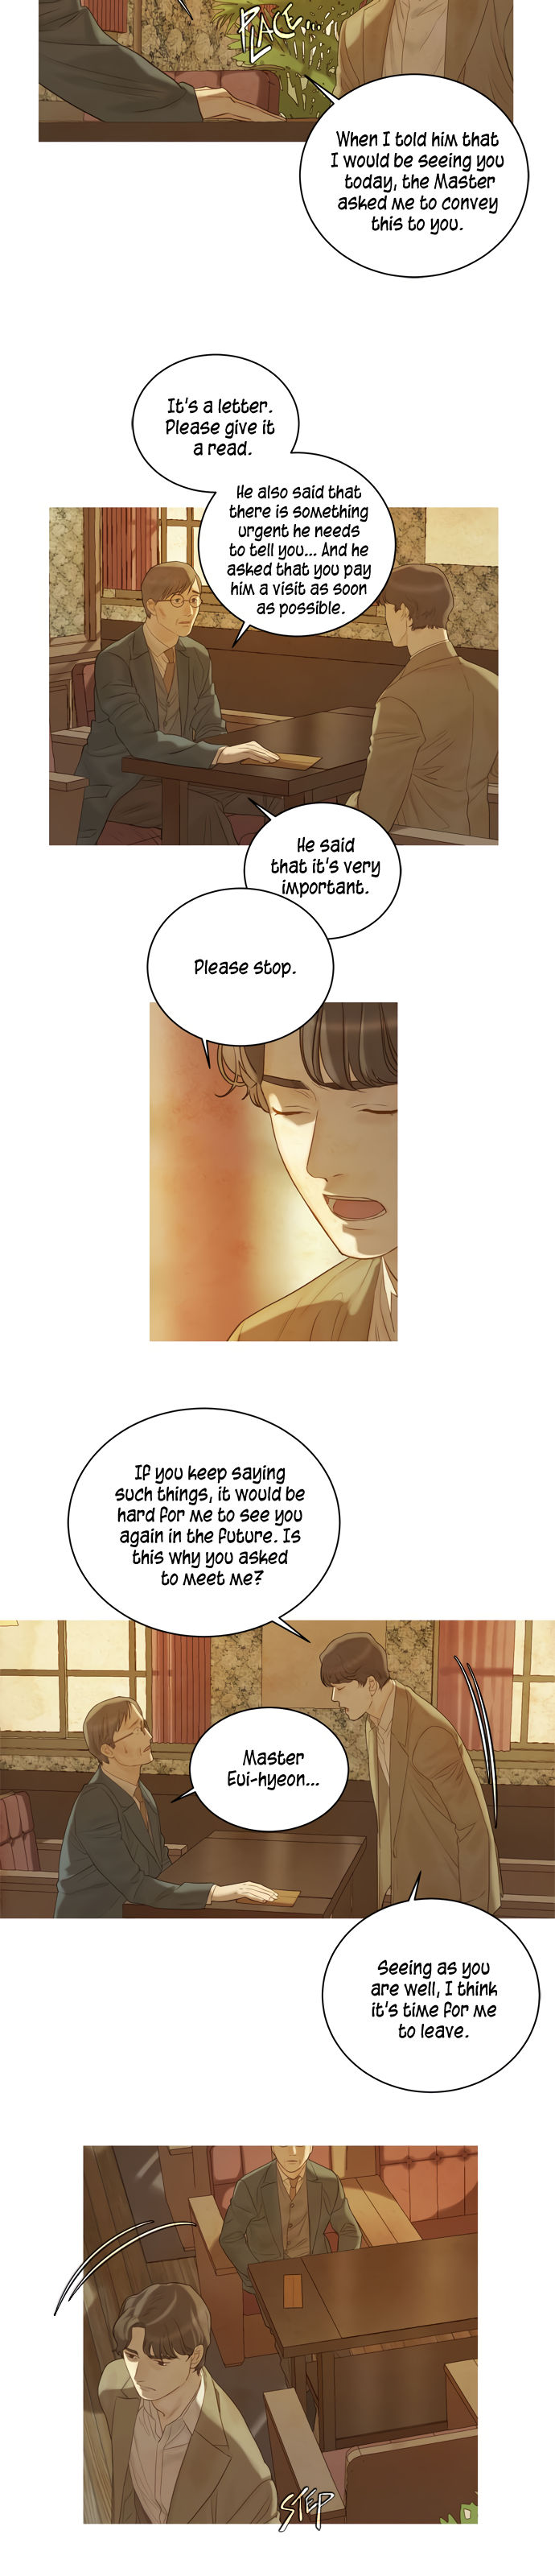 Gorae Byul - The Gyeongseong Mermaid - Chapter 17 Page 7